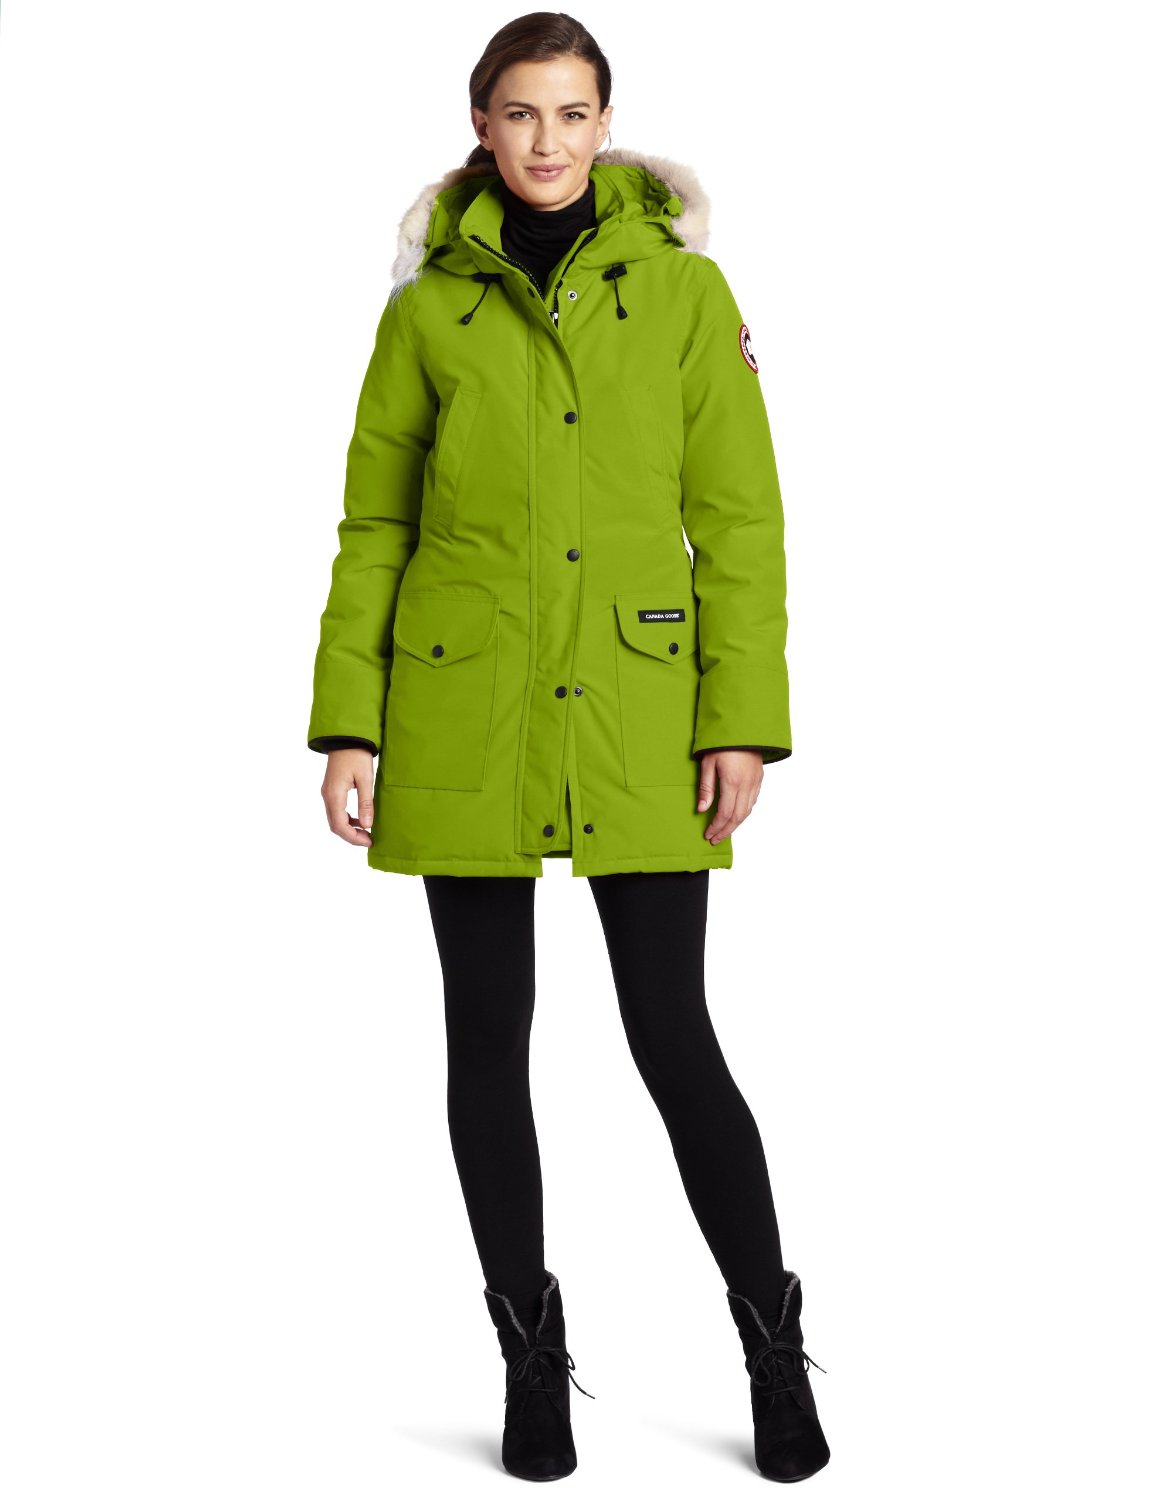 Canada Goose womens sale official - 44 dollar Goodwill shopping expedition - Page 18 of 63 - My ...